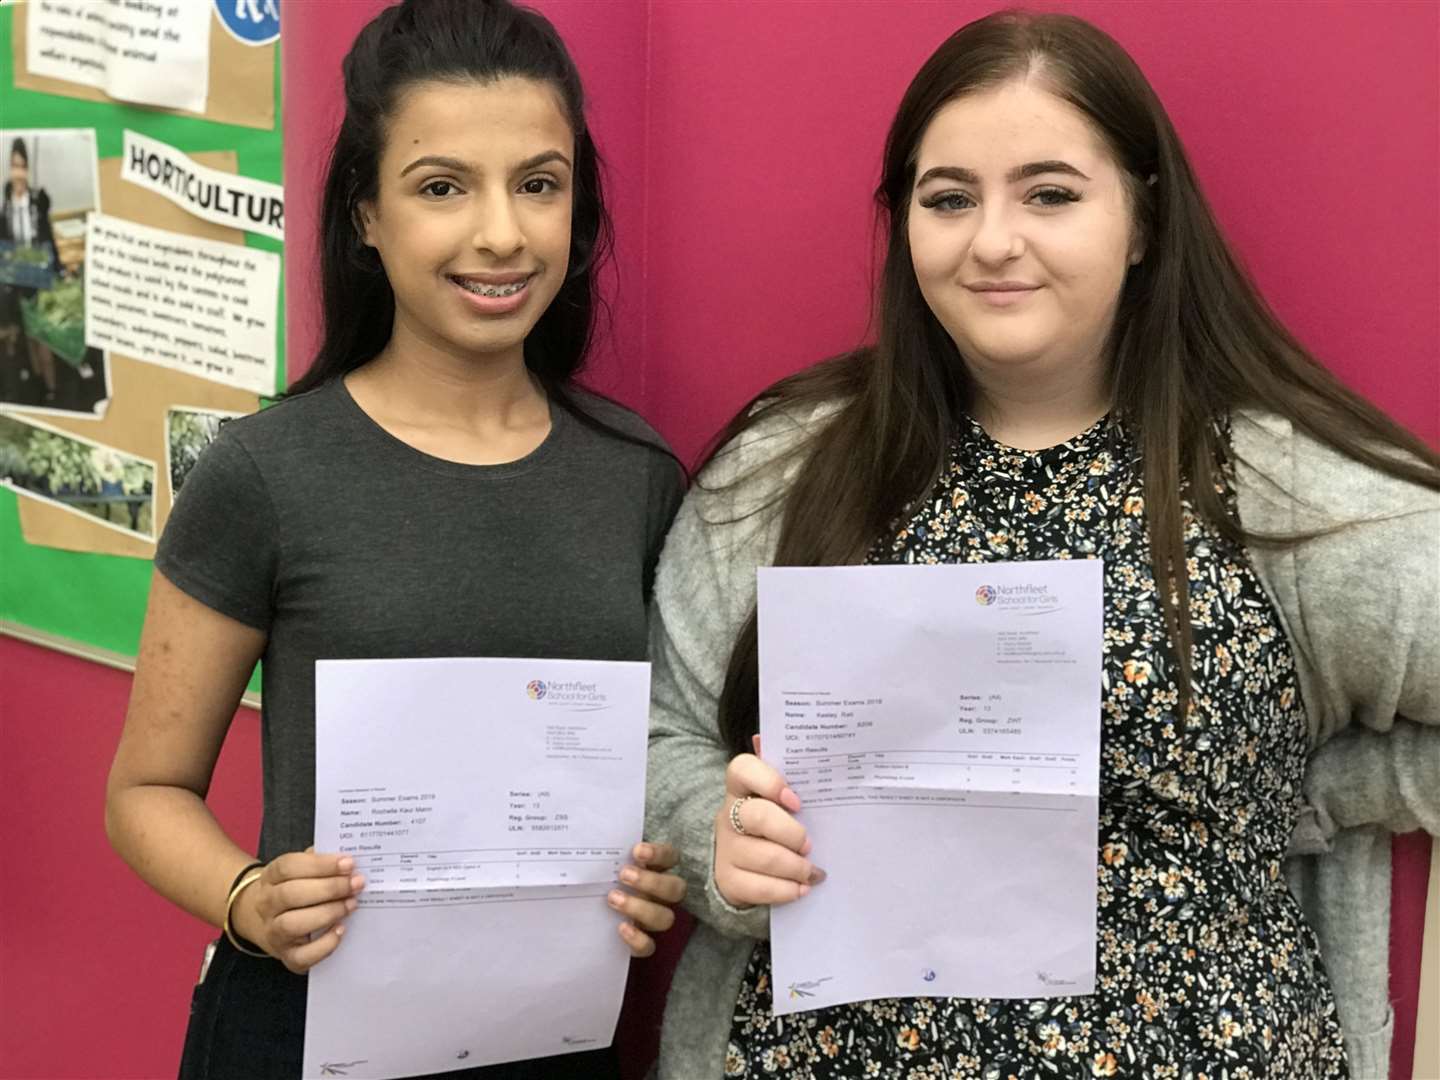 Rochelle Man (left) and Kes Rati (right) holding their exam results (15288580)